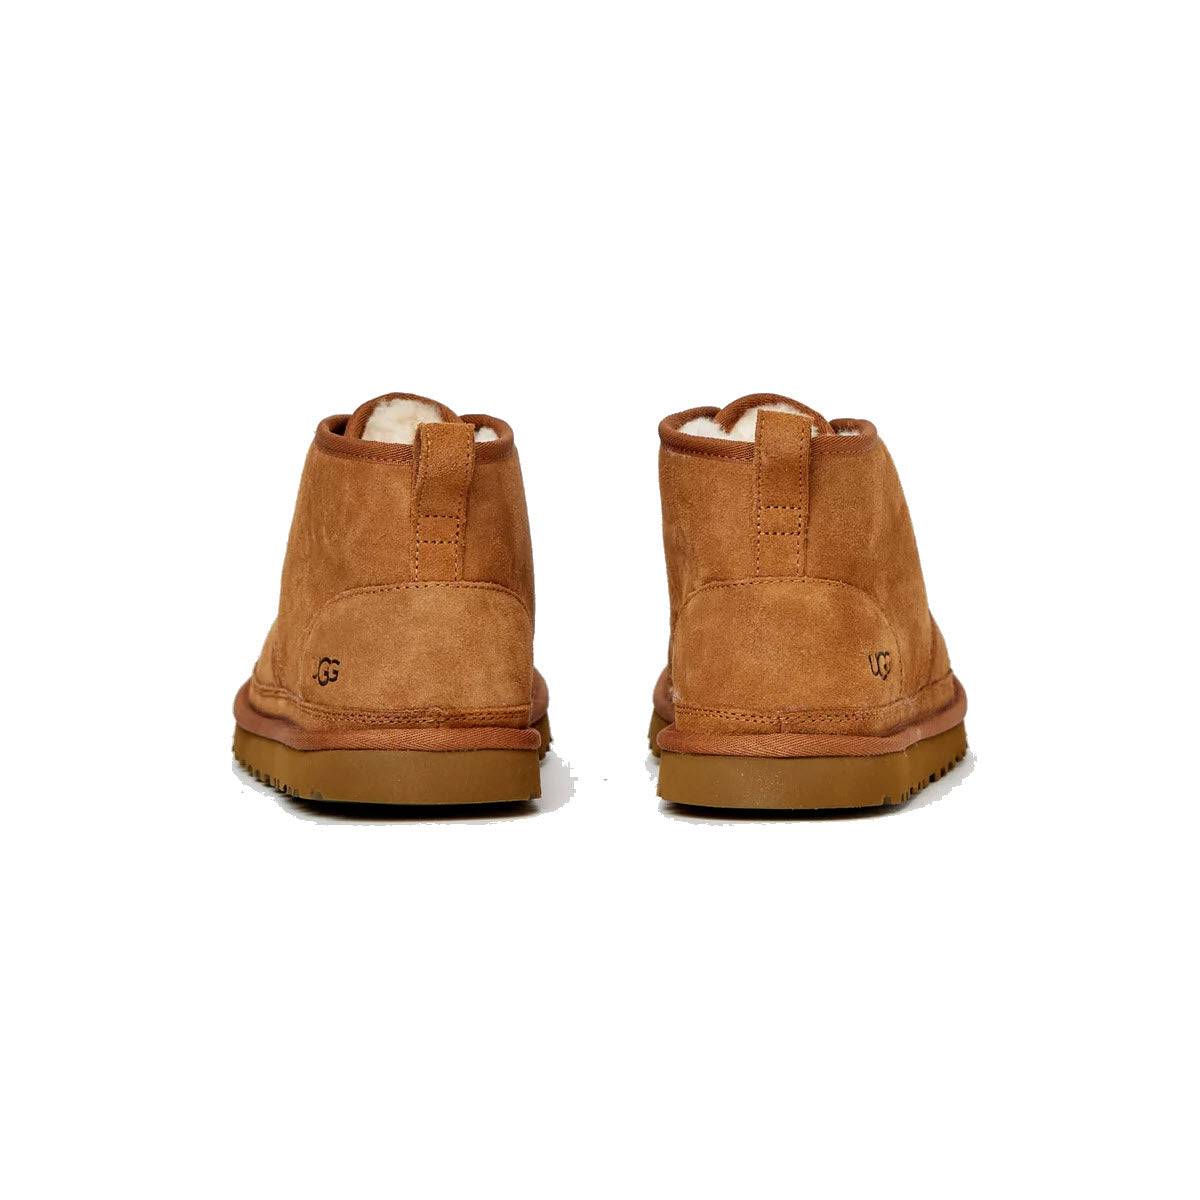 A pair of Ugg Neumel Lace Insulated boots in chestnut for men, viewed from the back, isolated against a white background.